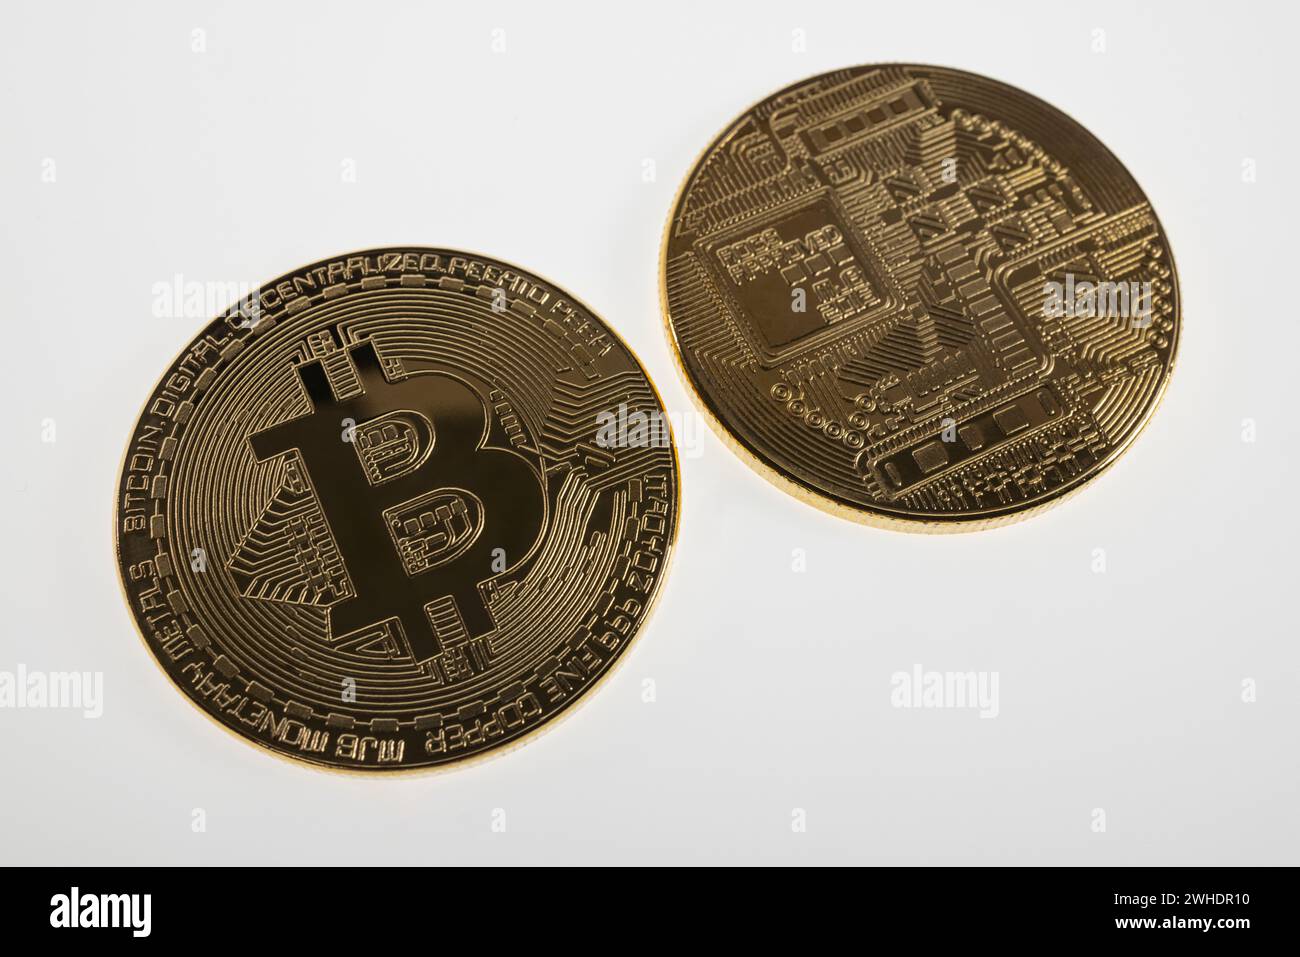 Two Bitcoin coins, front and back, white background, Stock Photo